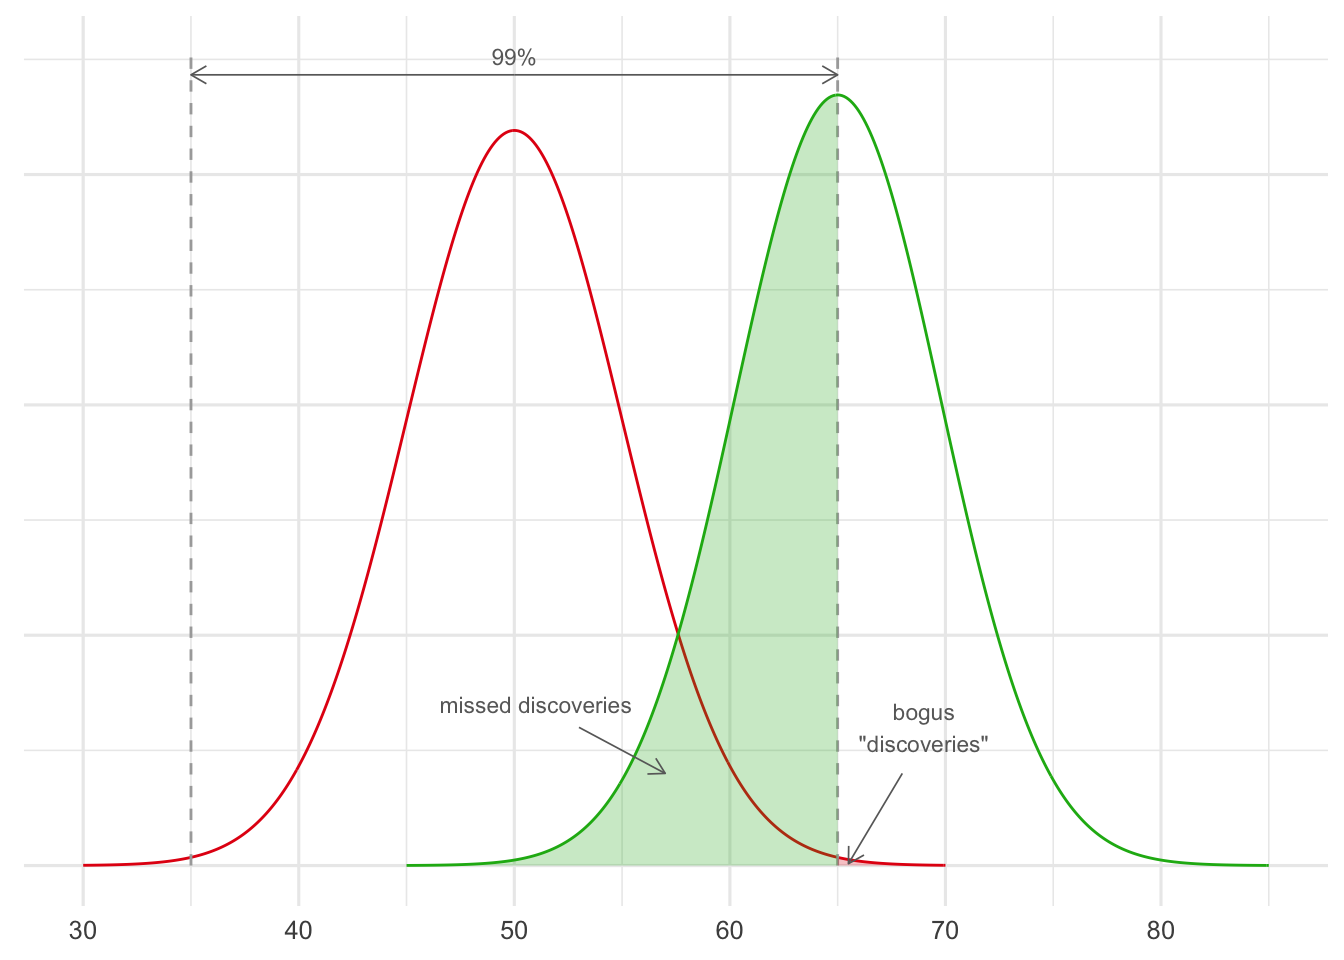 A significance cutoff of $.01$ when running studies with $100$ patients in each. The red curve represents the probable outcomes when studying useless treatments ($50\%$ chance of recovery), the green curve represents the probable outcomes when studying effective treatments ($65\%$ chance of recovery).